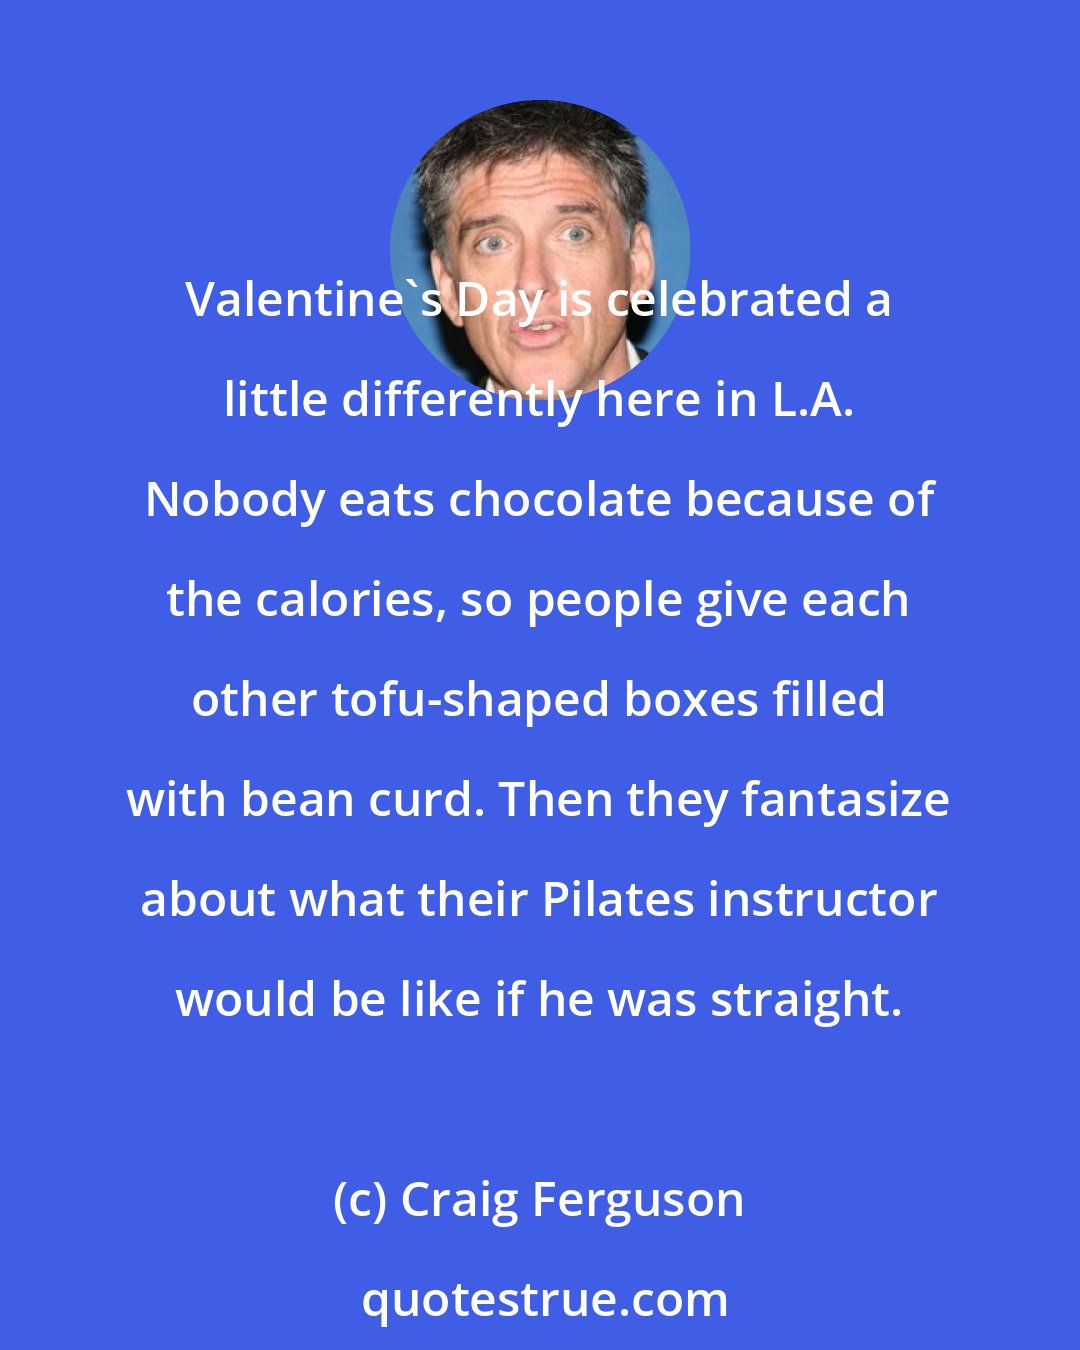 Craig Ferguson: Valentine's Day is celebrated a little differently here in L.A. Nobody eats chocolate because of the calories, so people give each other tofu-shaped boxes filled with bean curd. Then they fantasize about what their Pilates instructor would be like if he was straight.